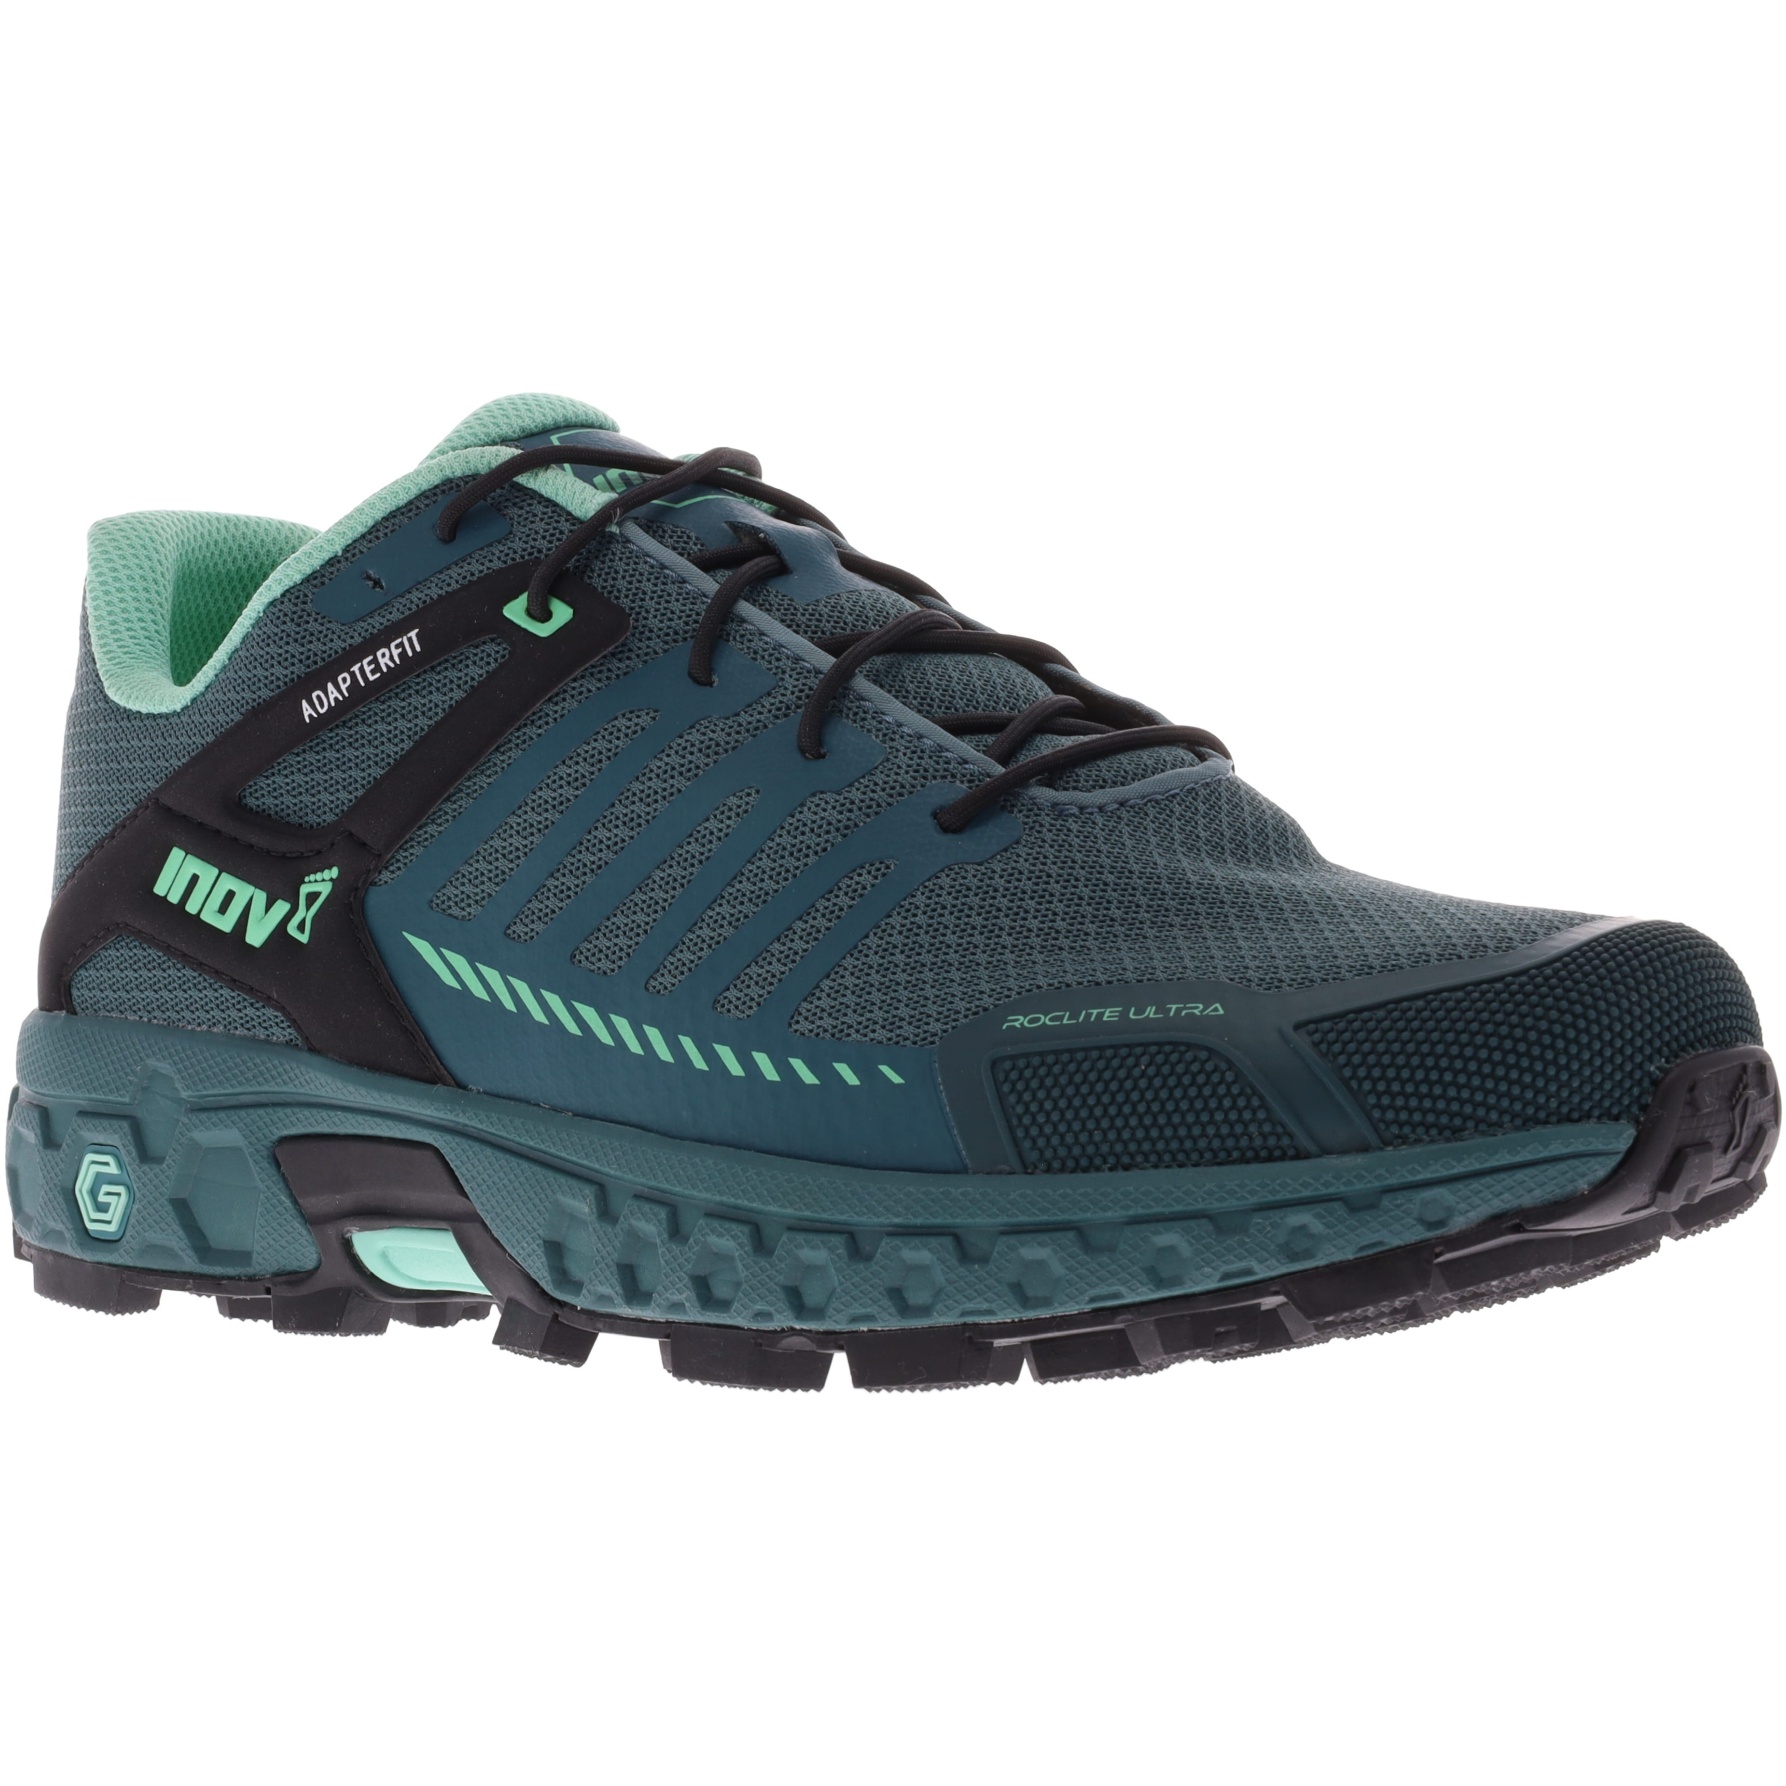 Image of Inov-8 Roclite Ultra G 320 Women's Running Shoes - teal/mint